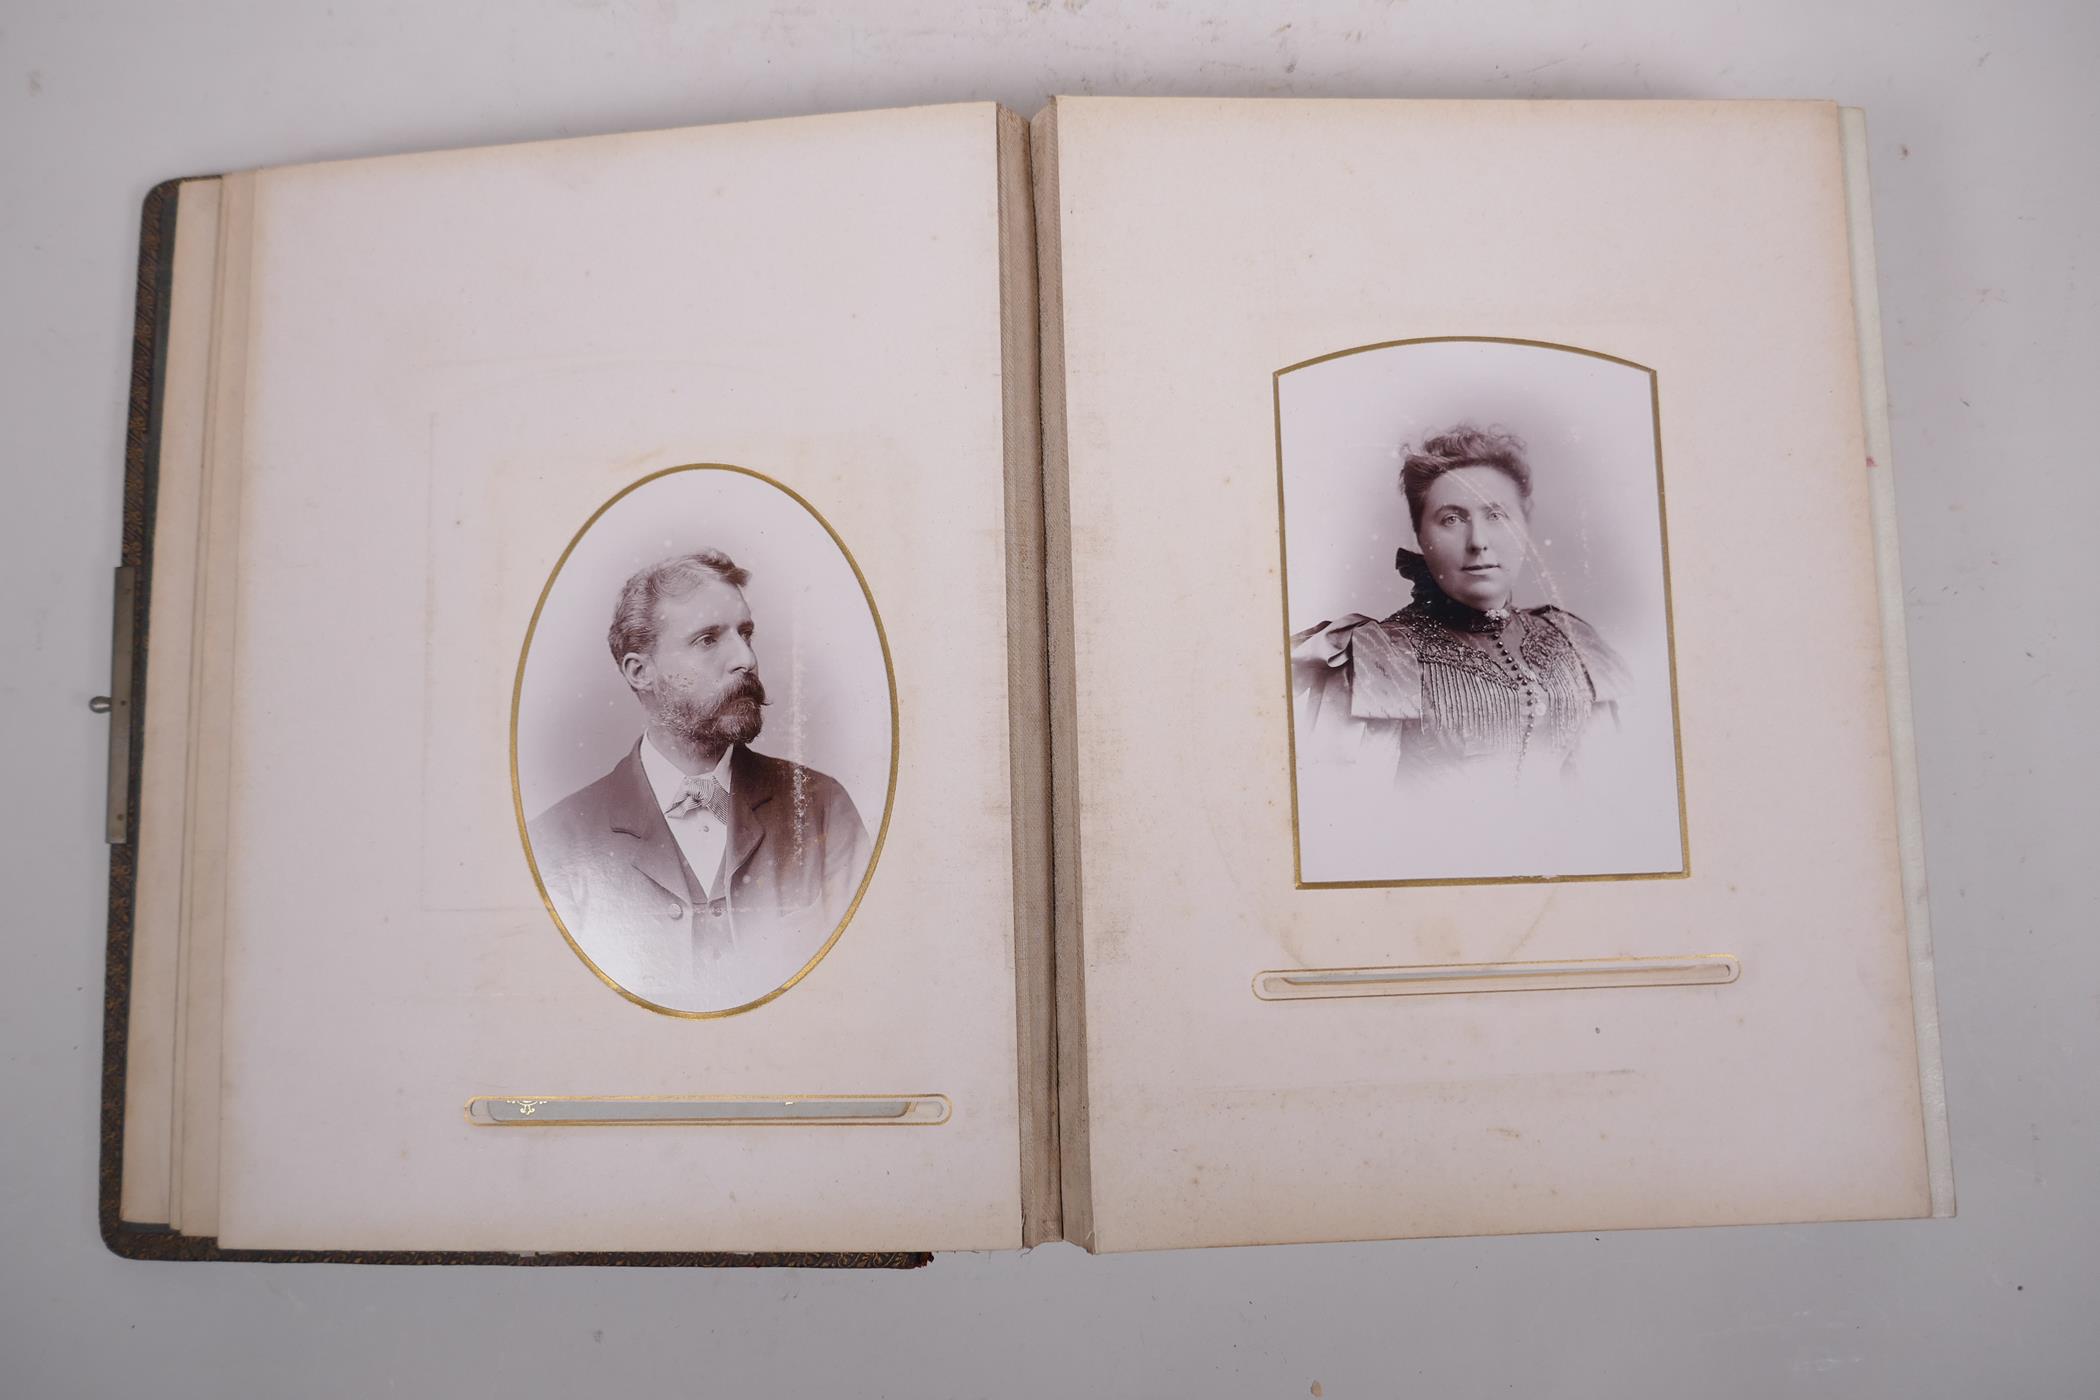 A late C19th/early C20th German leather bound photograph album containing portrait photos from the